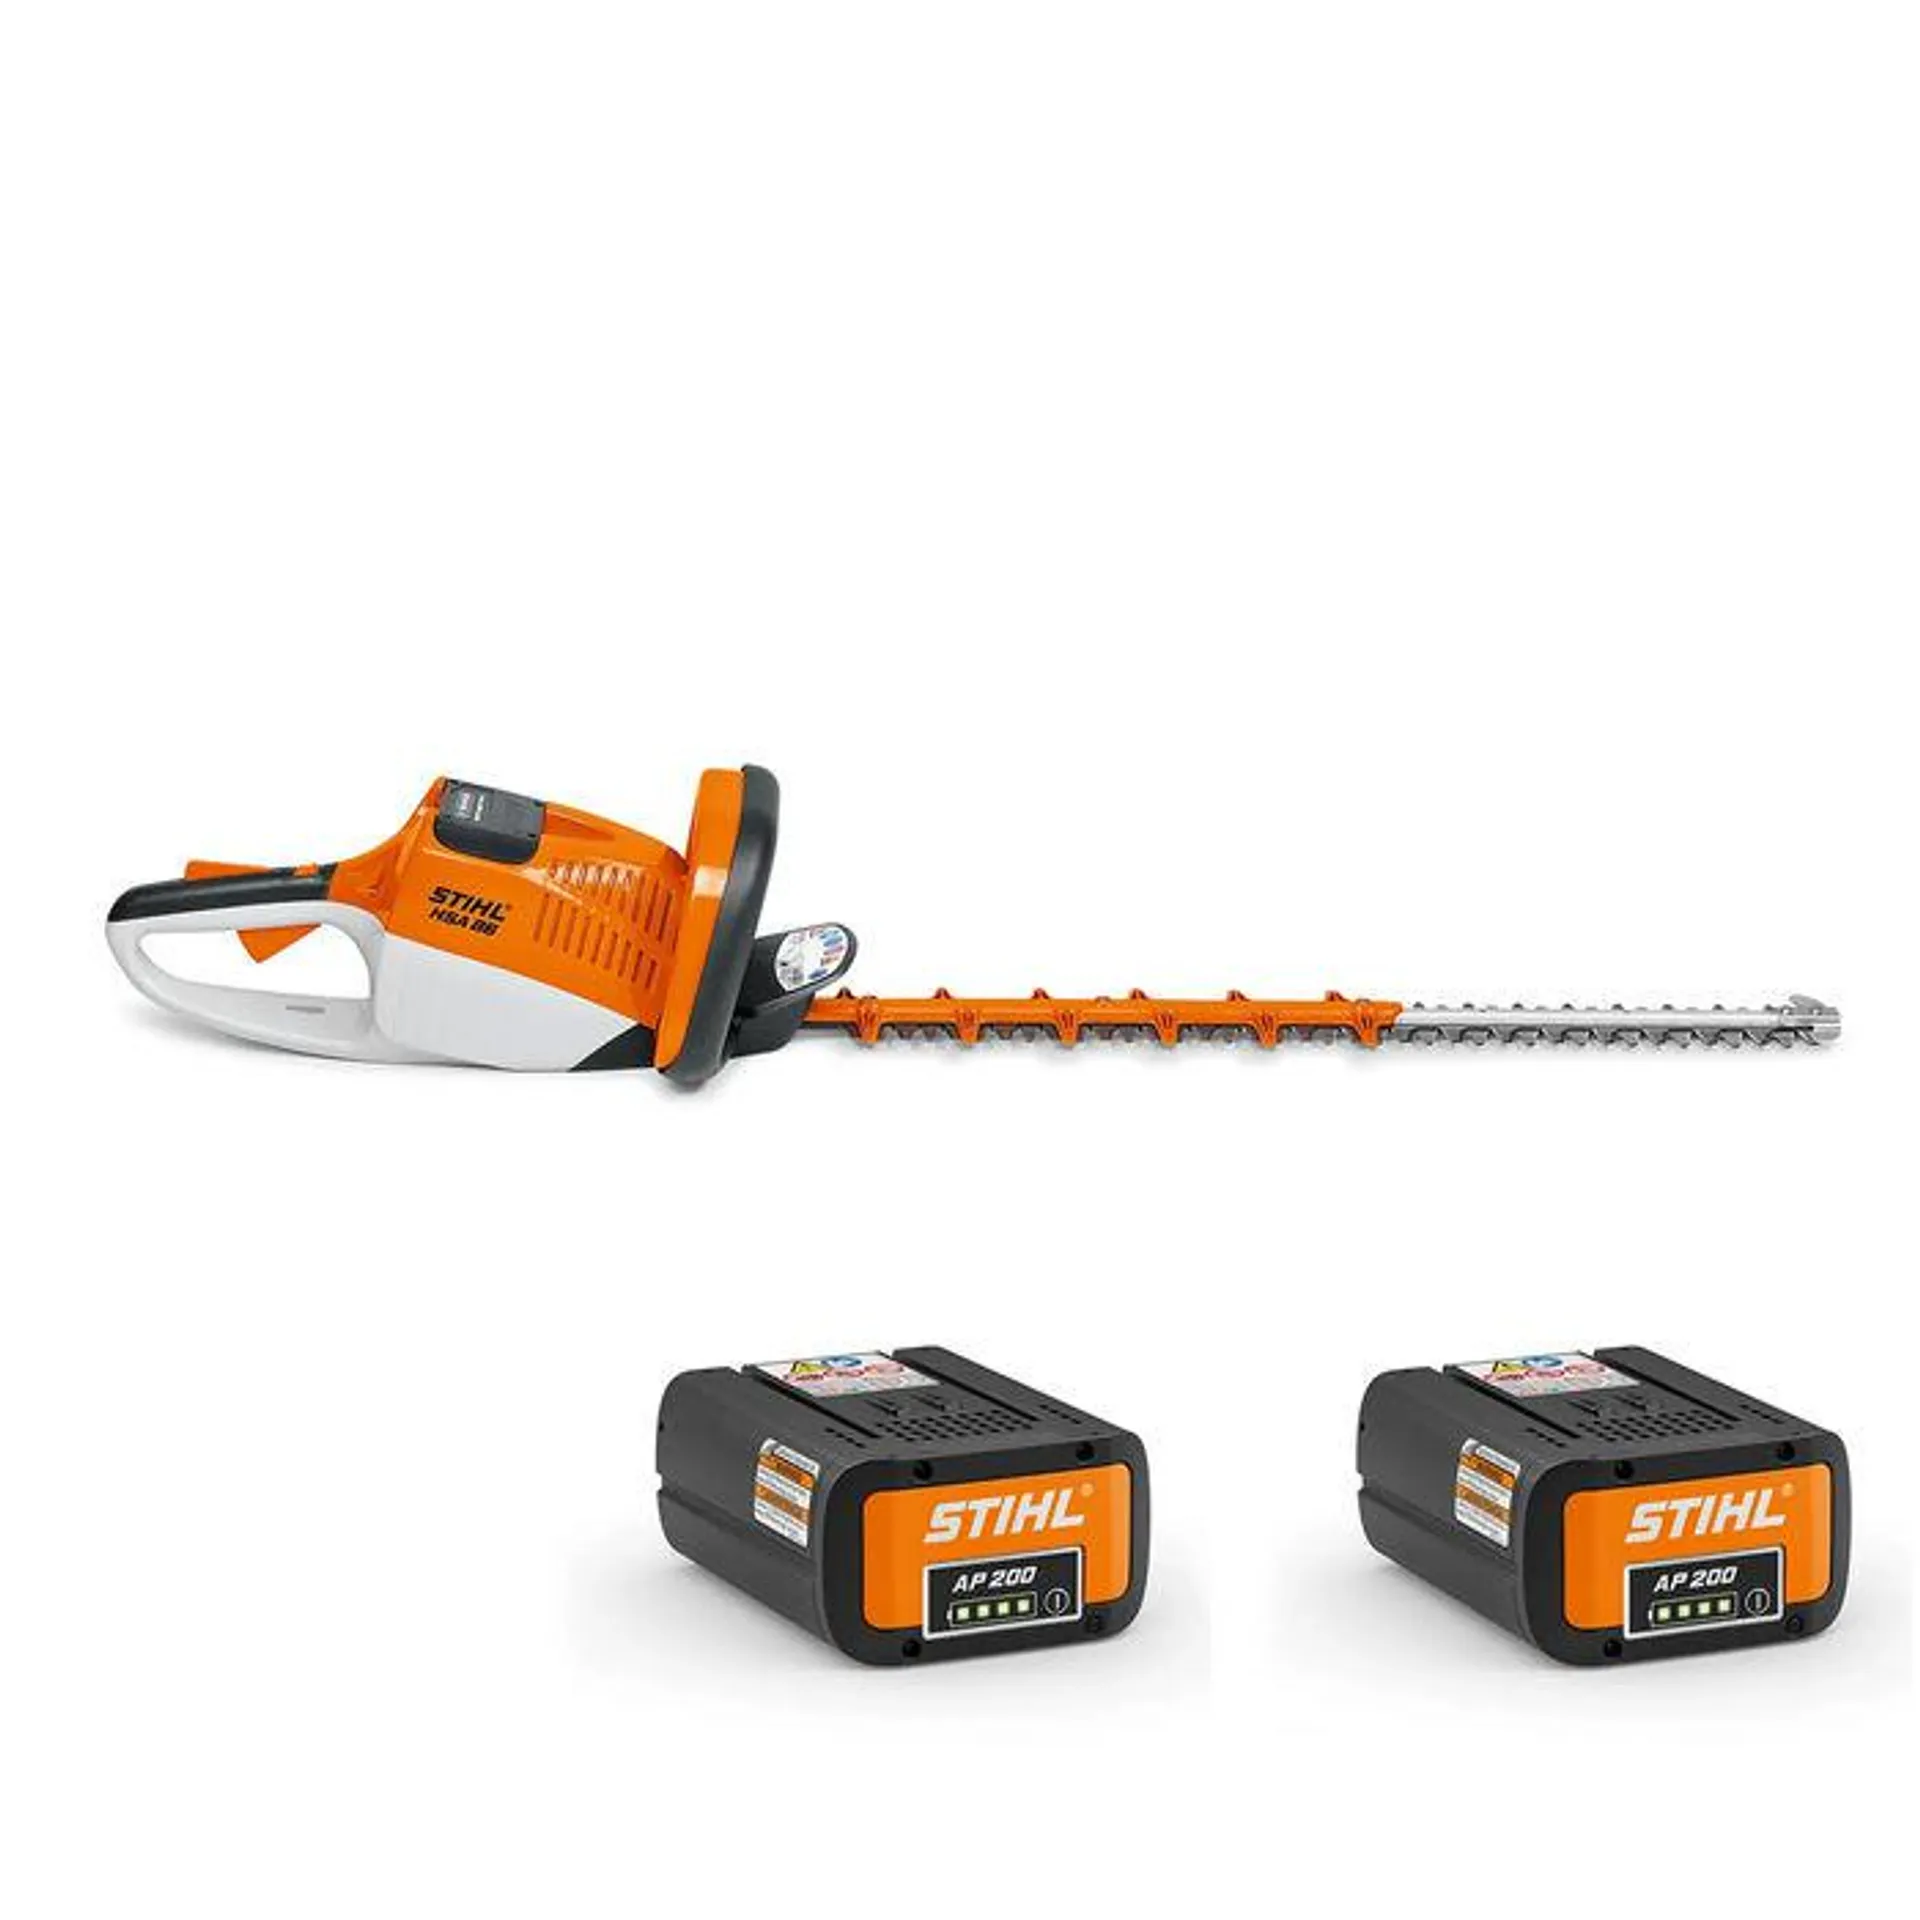 STIHL HSA 86 Battery Hedgetrimmer Kit (With 2 Batteries)